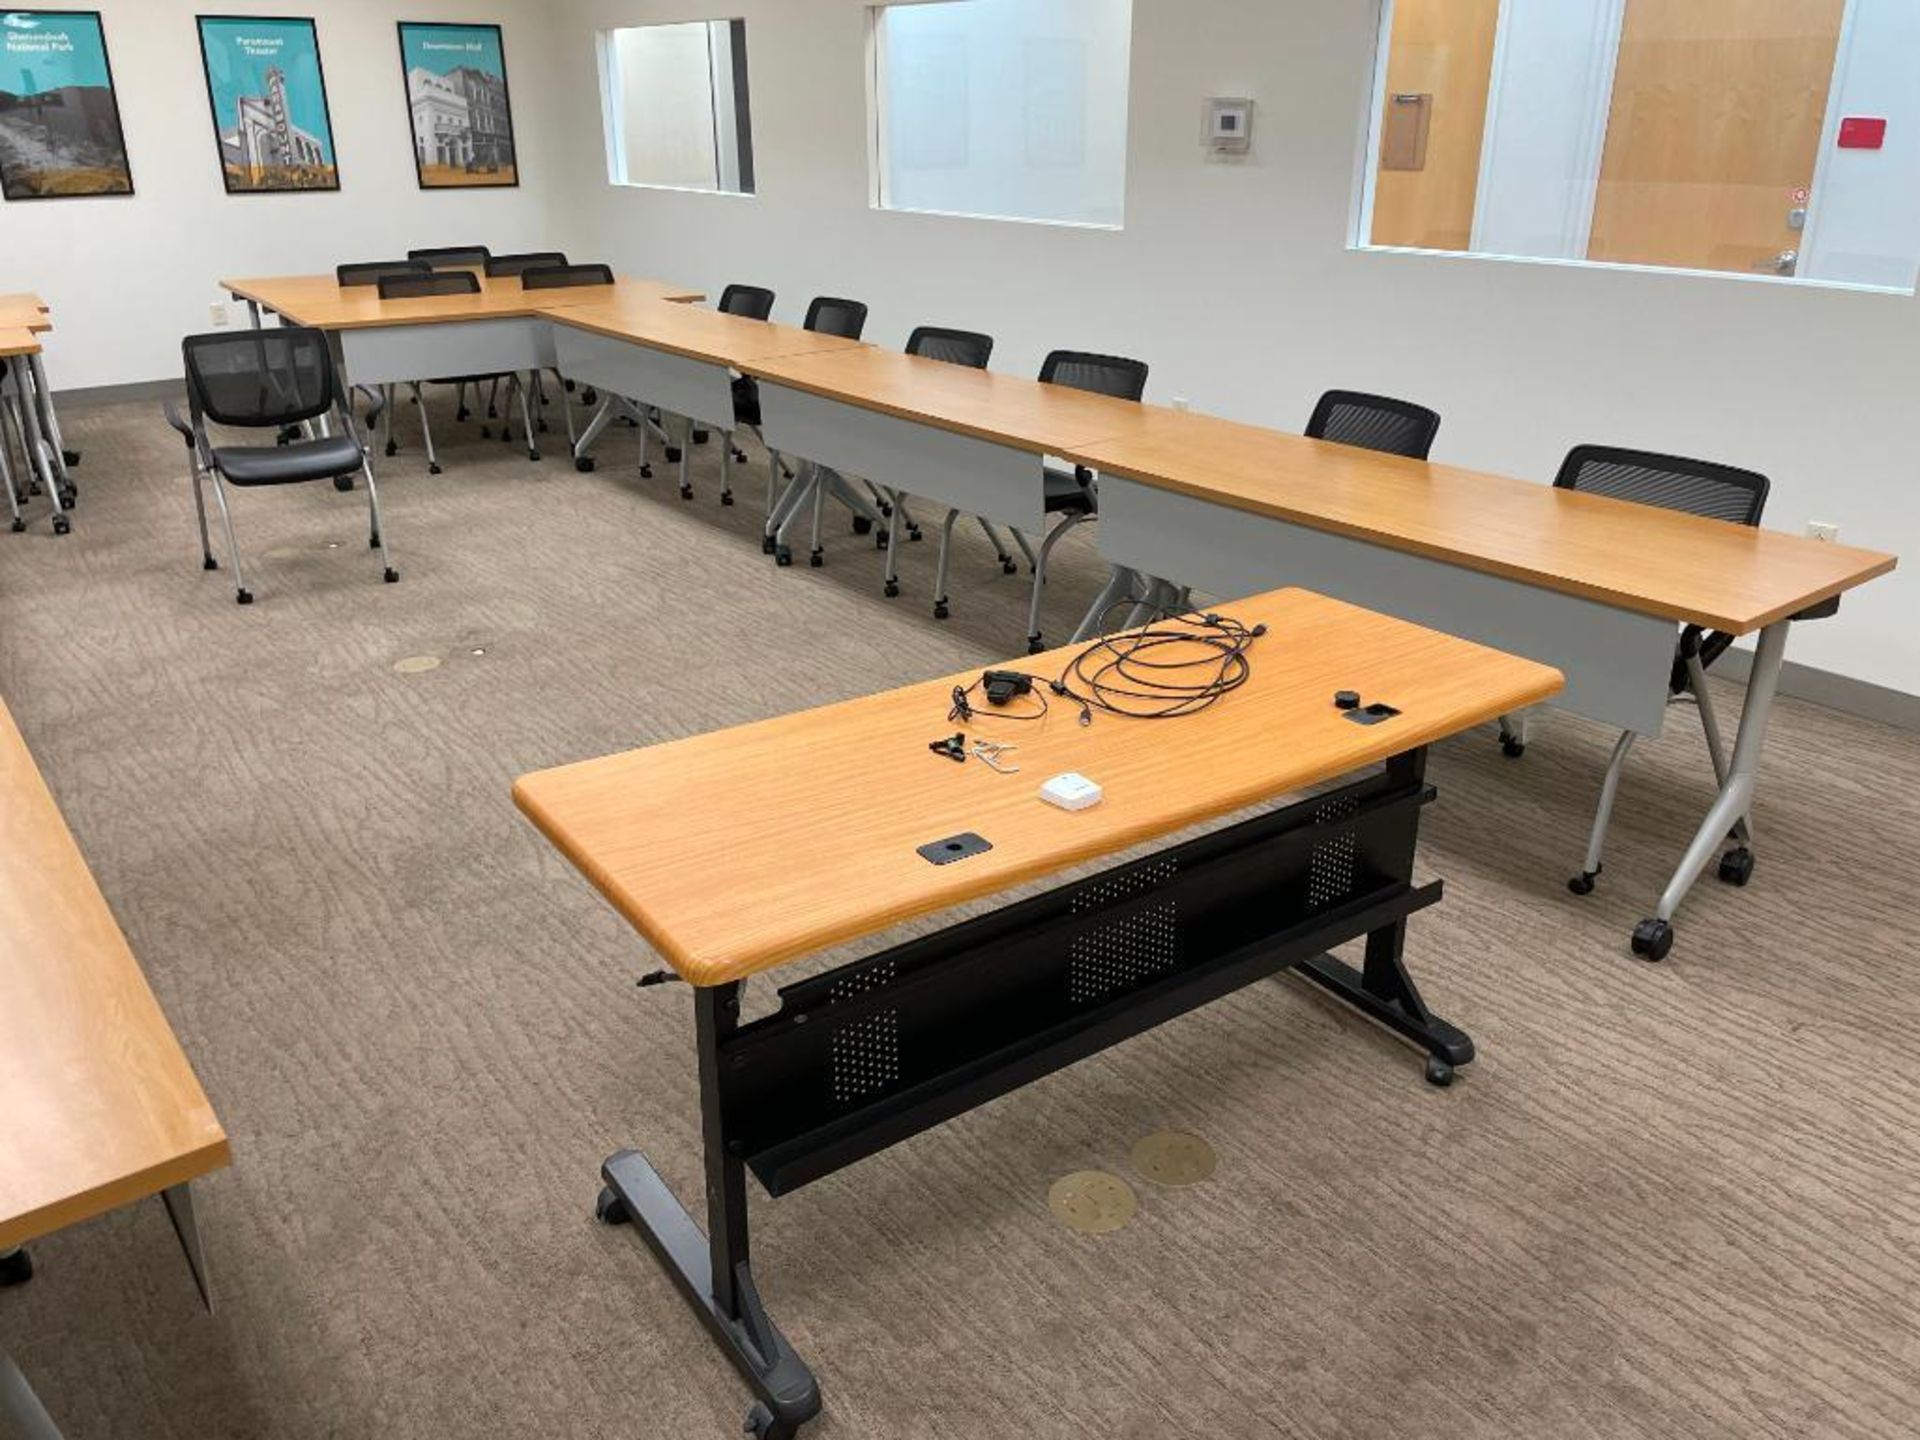 Content of Training Room w/ (13) Tables & (24) Chairs - Image 3 of 4